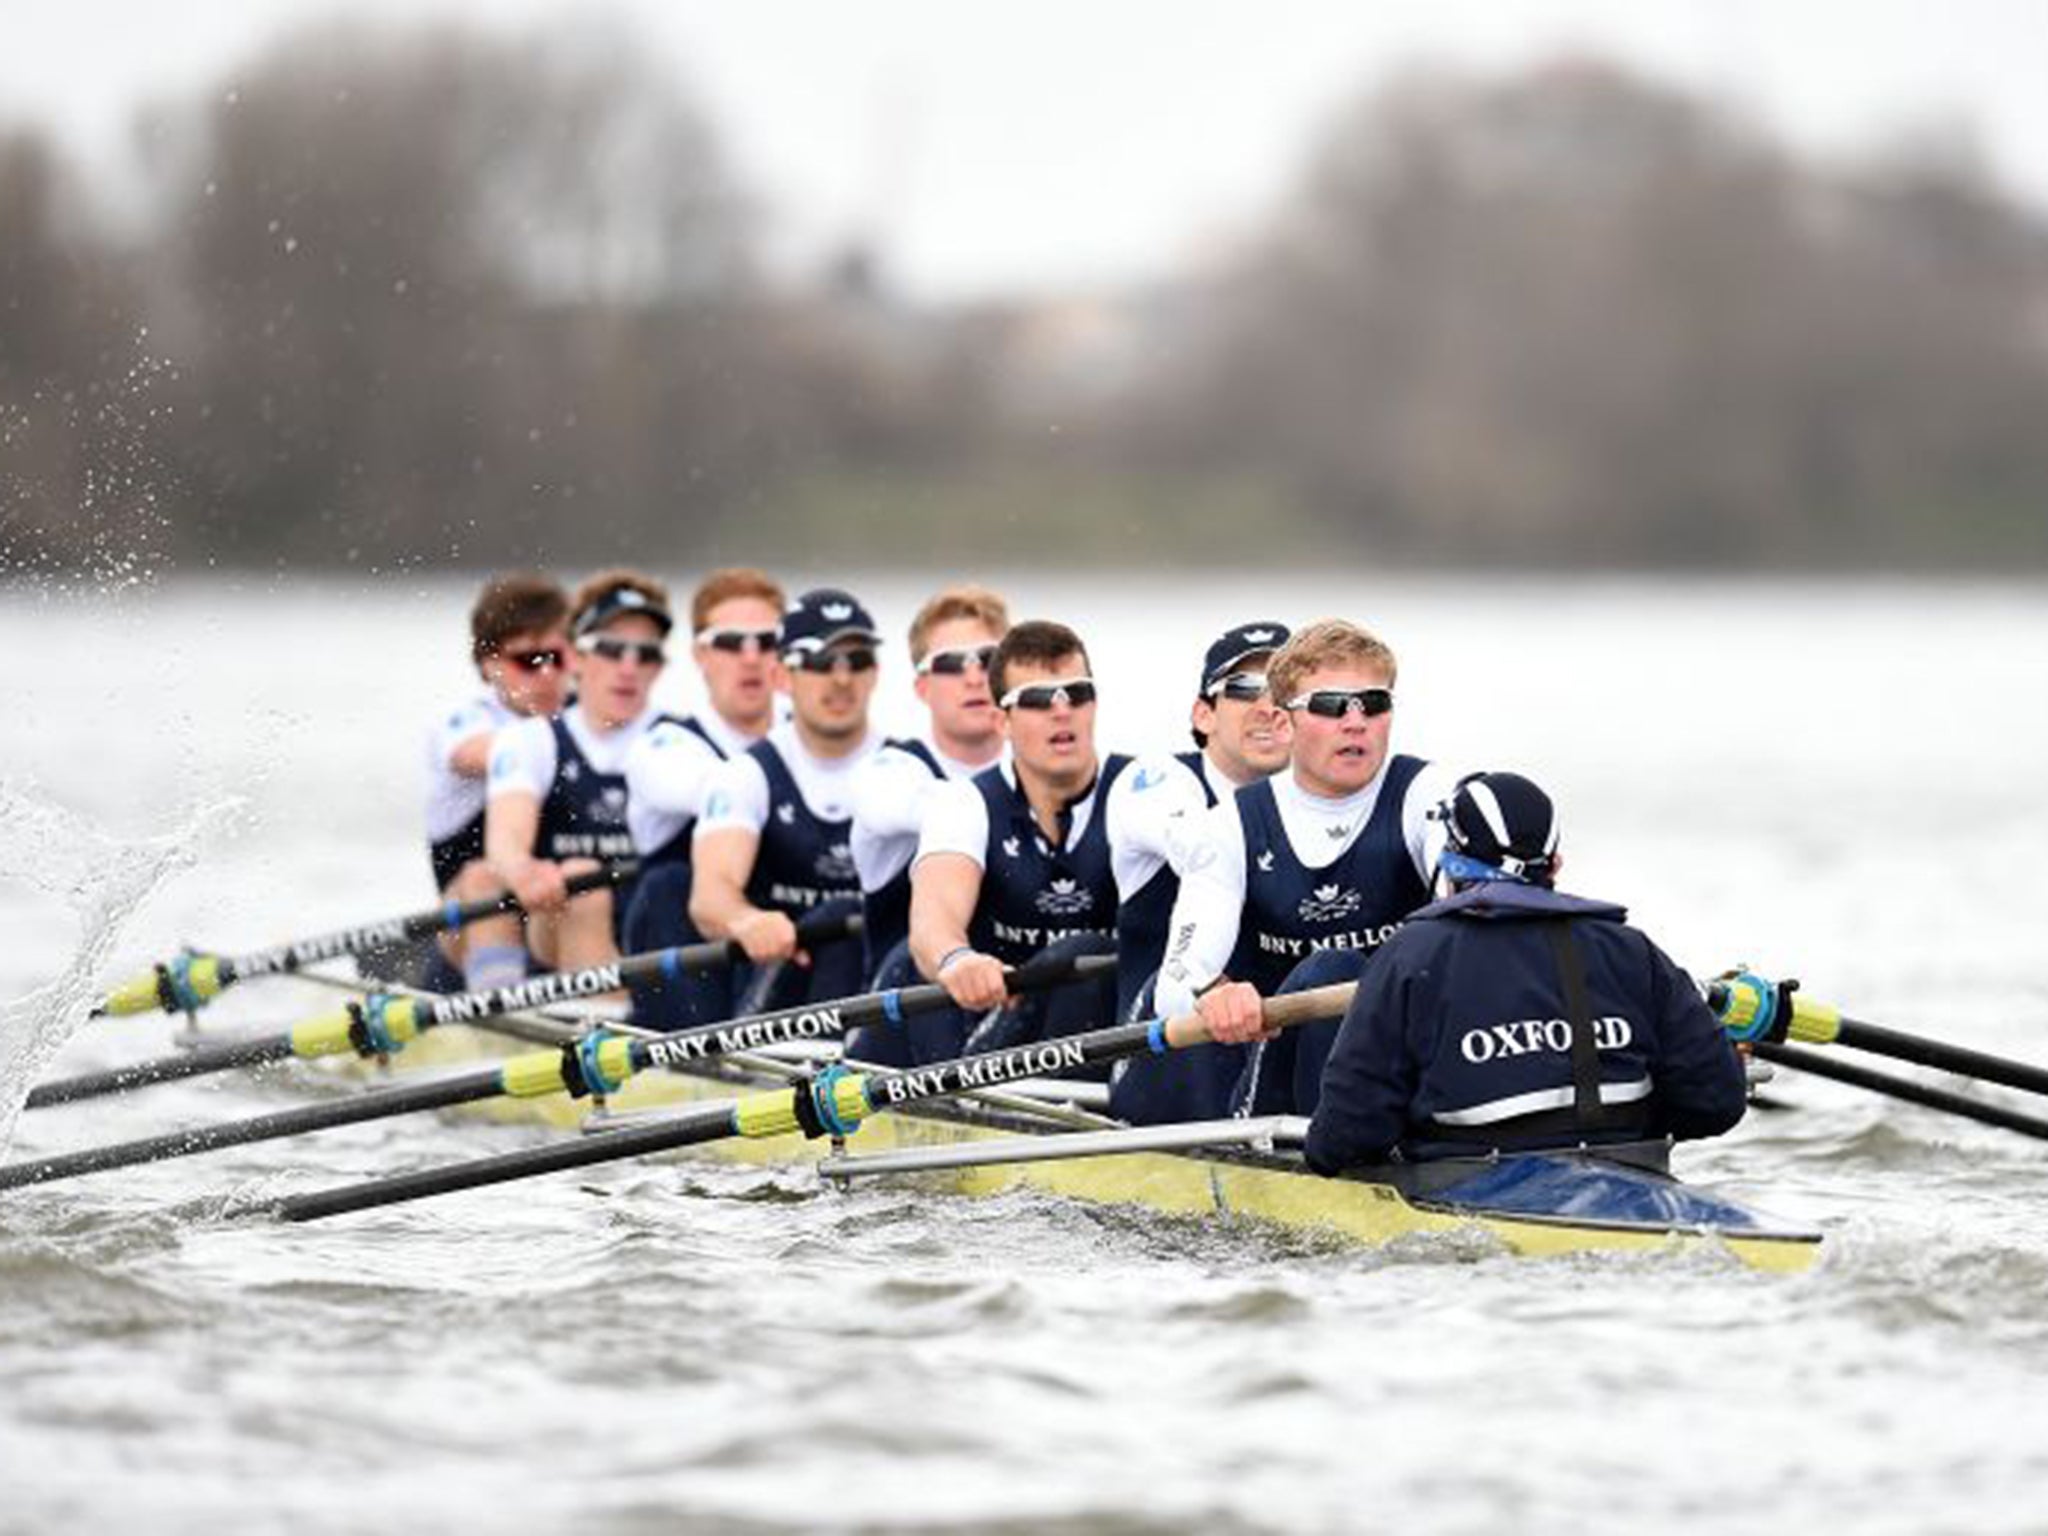 The Oxford crew training on the Thames for next Saturday’s annual showdown